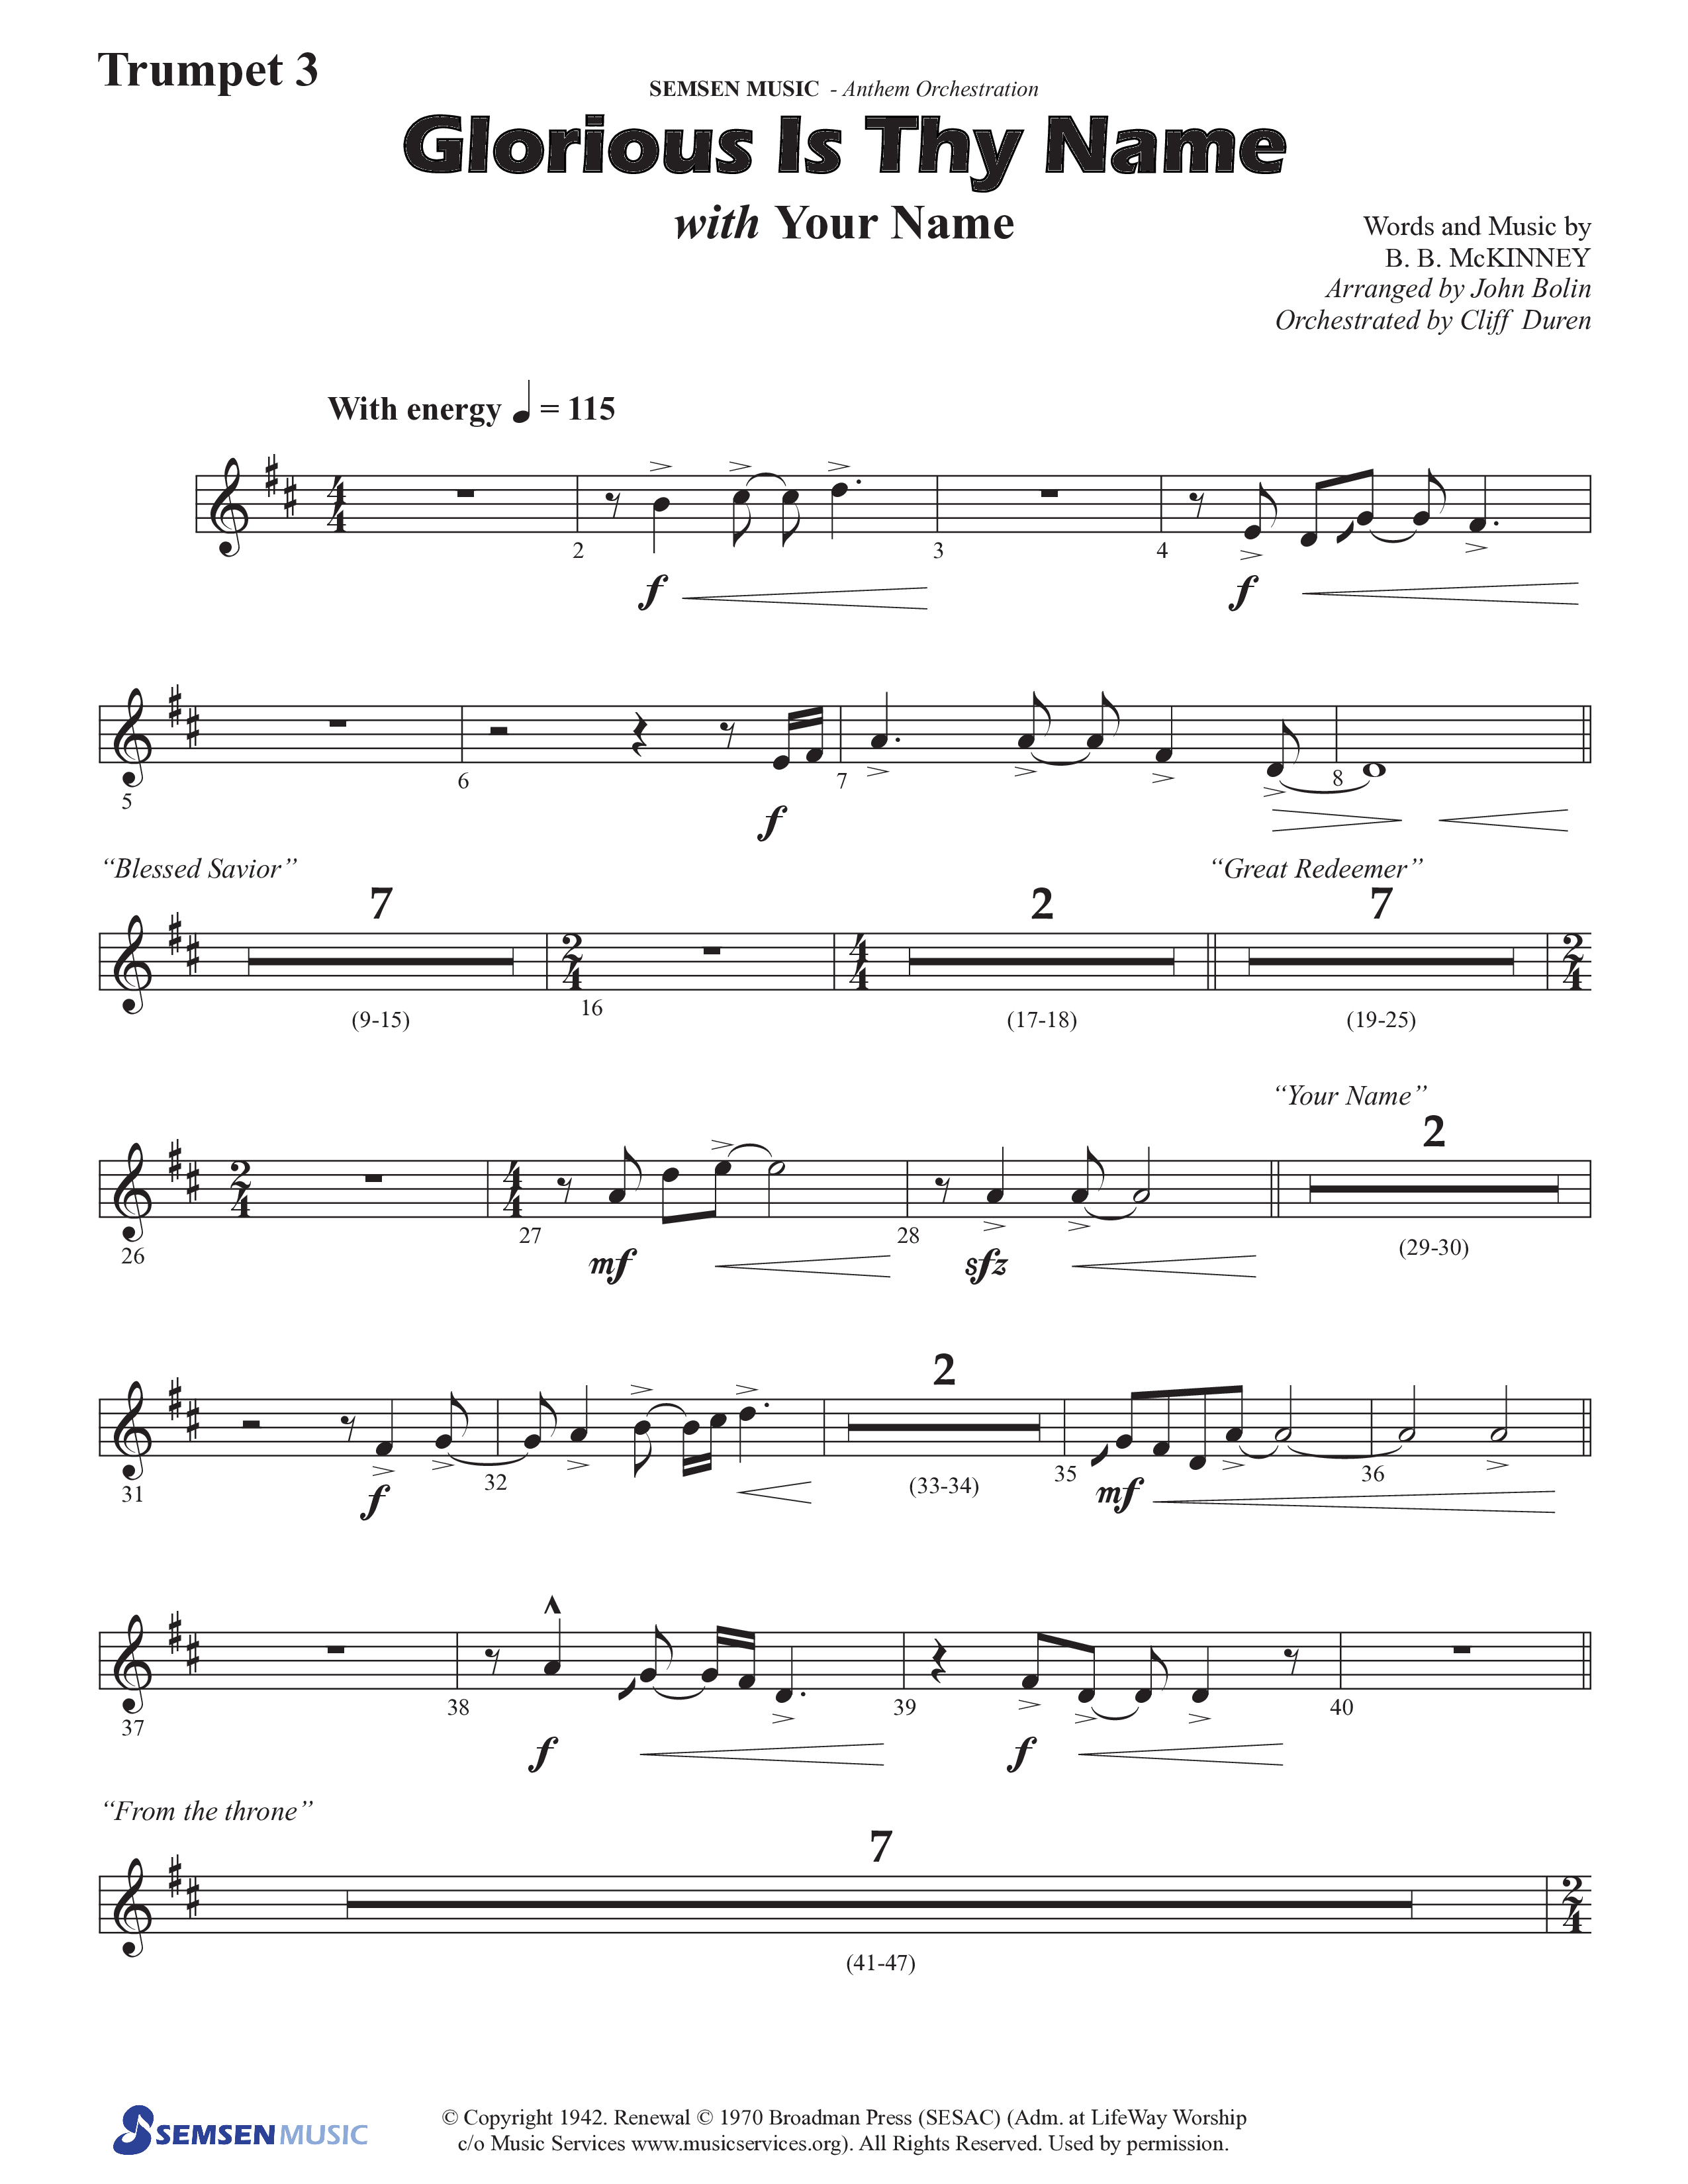 Glorious Is Thy Name (with Your Name) (Choral Anthem SATB) Trumpet 3 (Semsen Music / Arr. John Bolin / Orch. Cliff Duren)